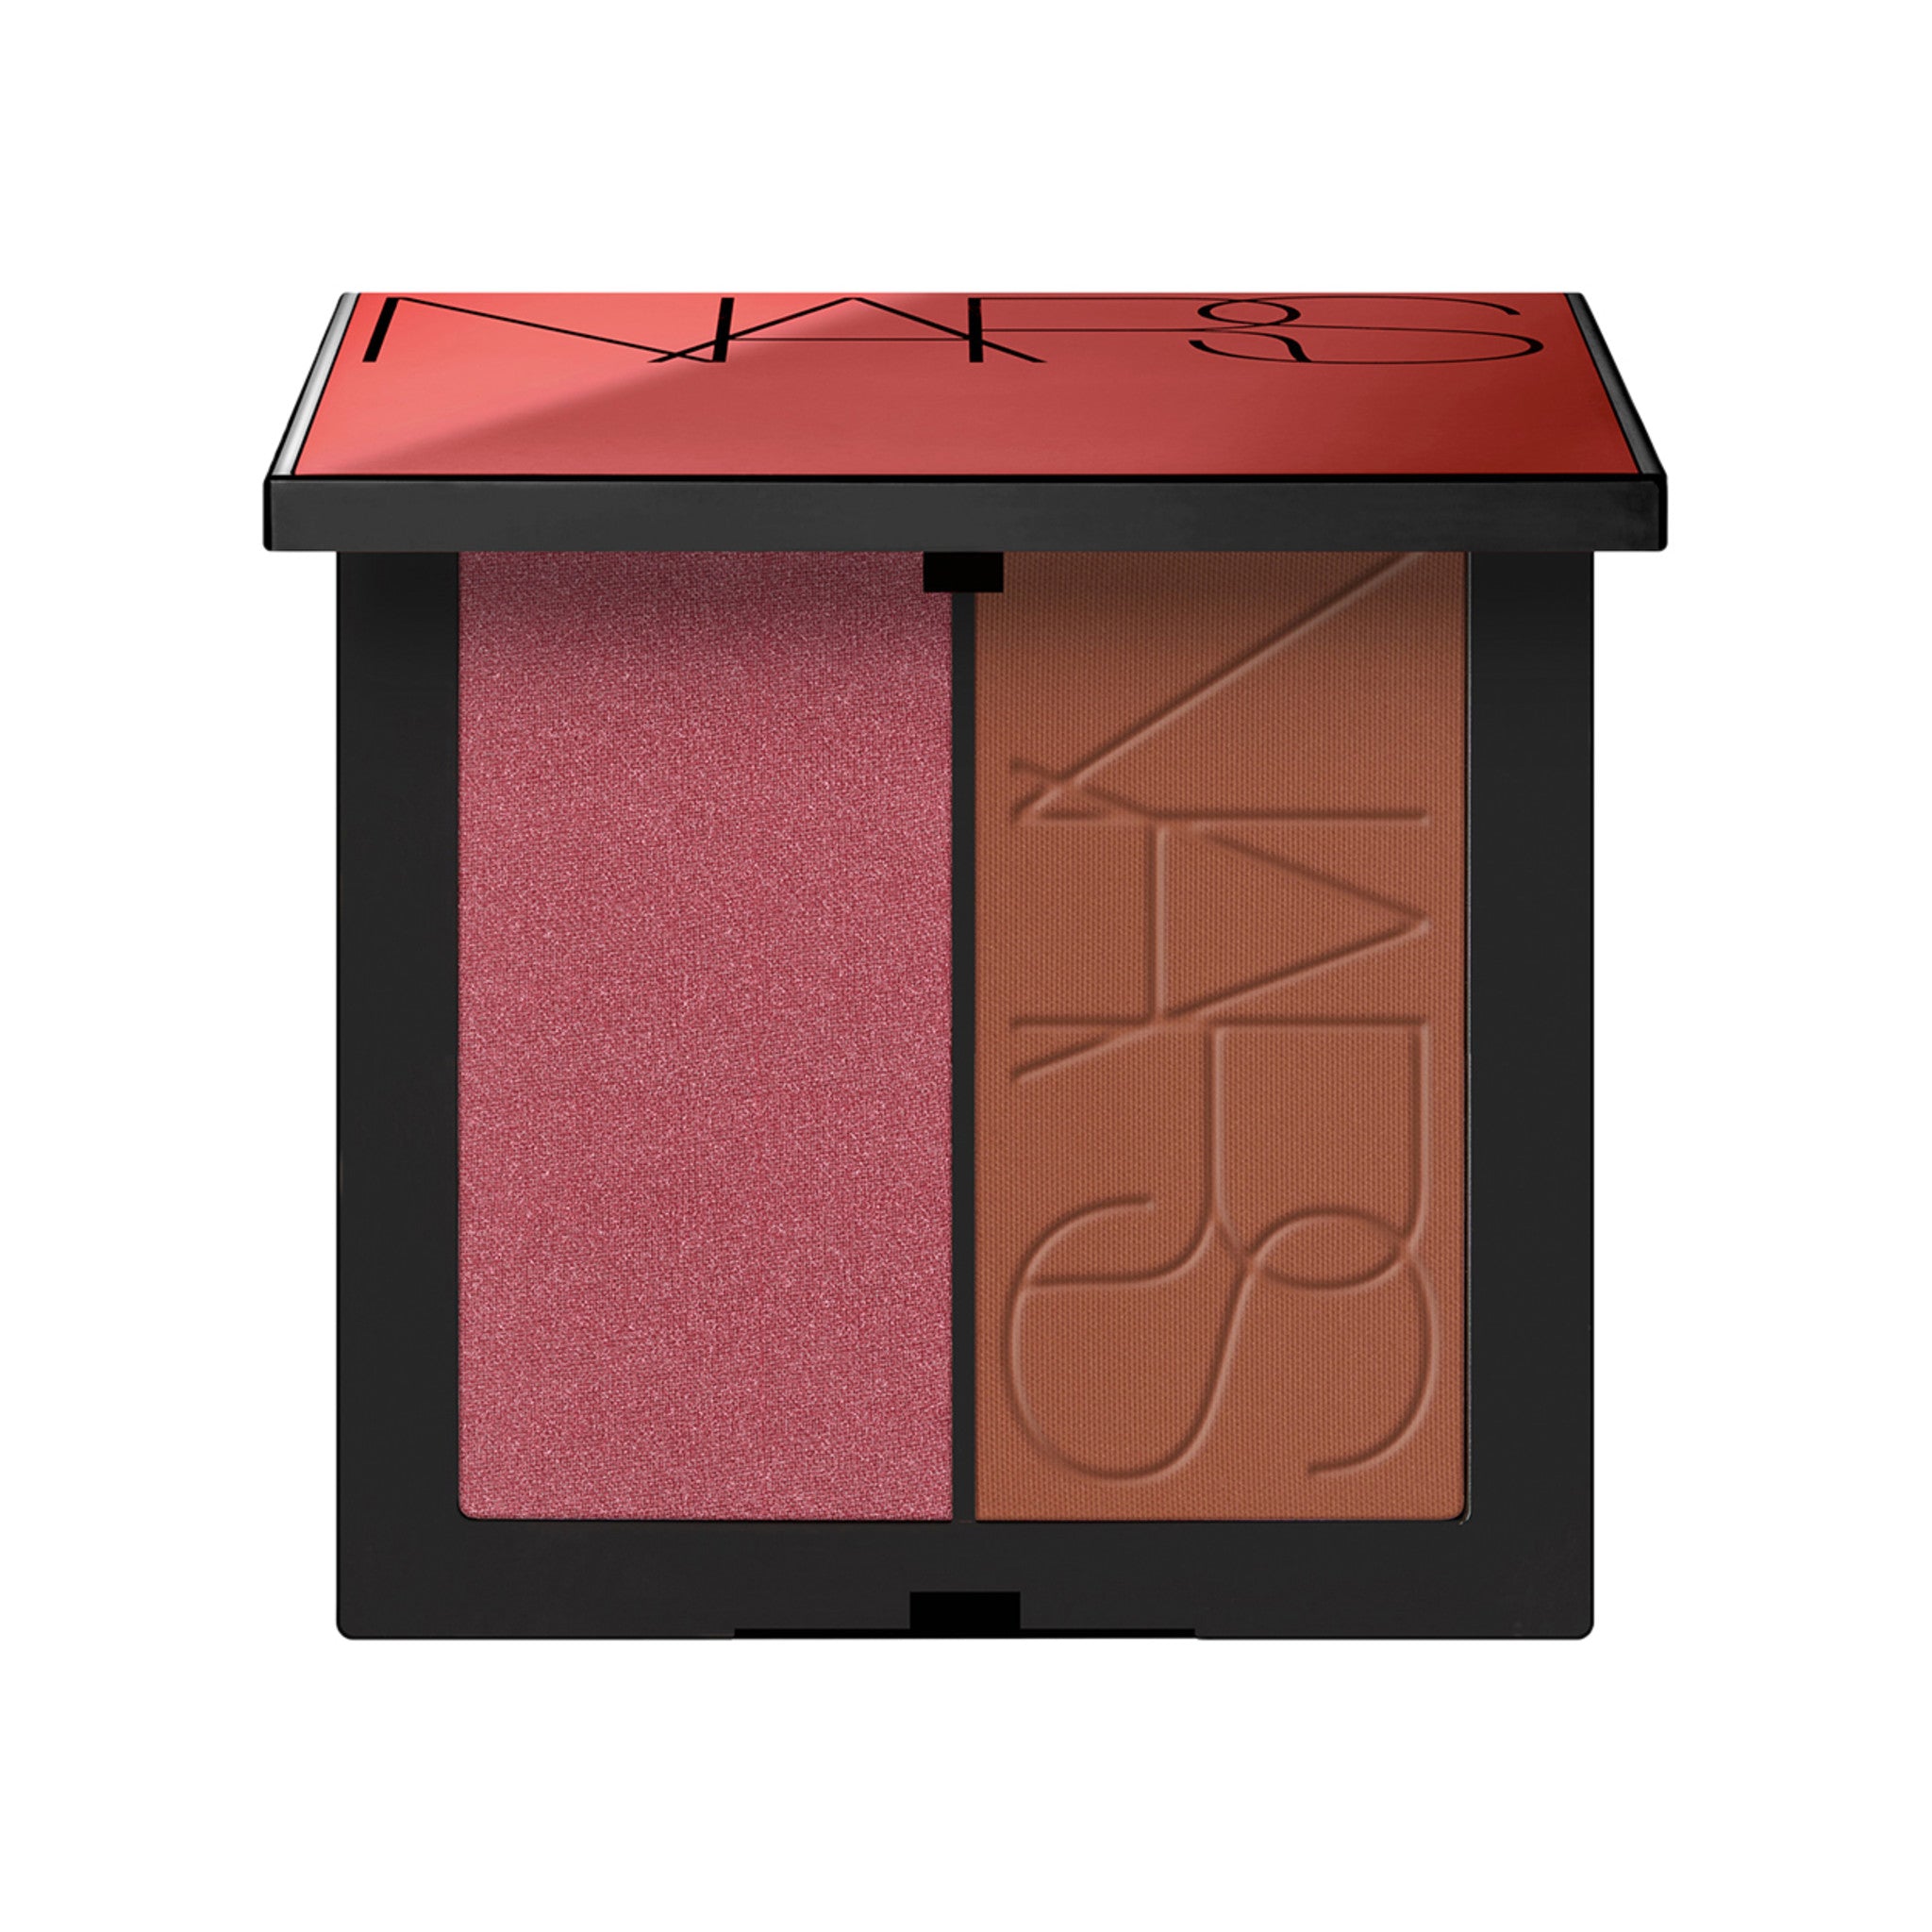 Nars Summer Unrated Blush/Bronzer Duo Color/Shade variant: Dominate/Cyprus main image. This product is in the color multi